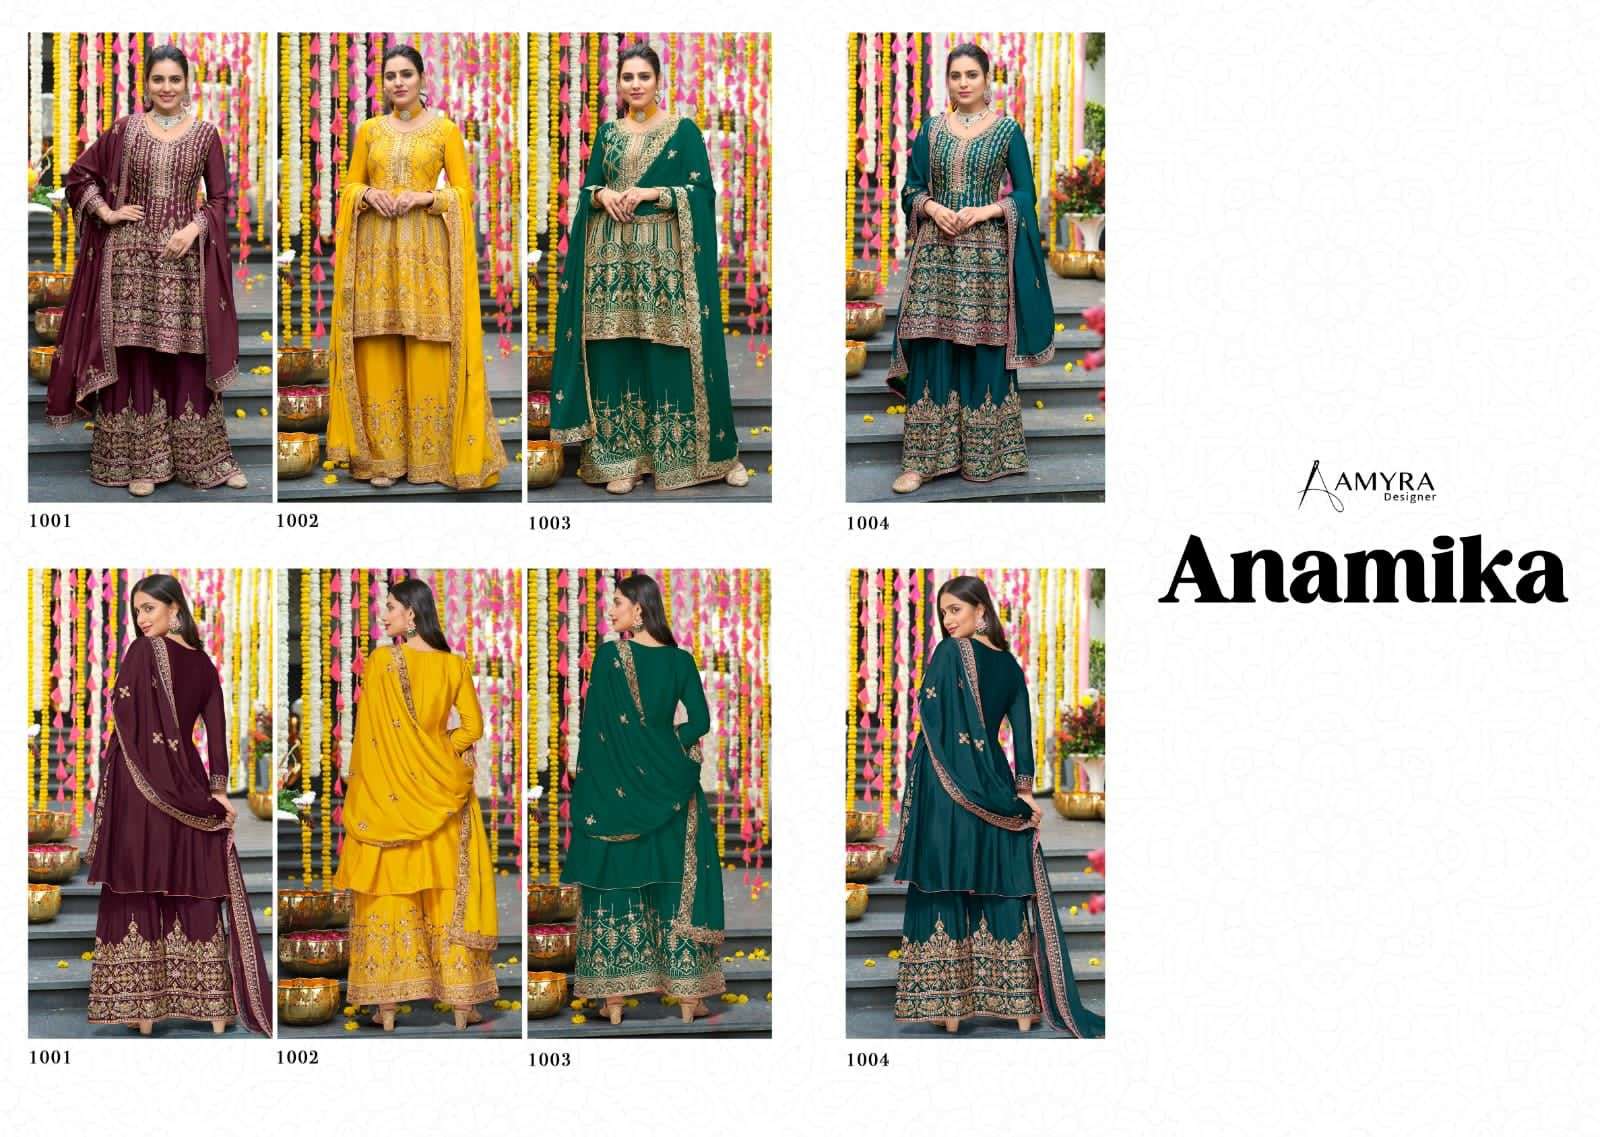   ANAMIKA BY AMYRA DESIGNER 1001 TO 1004 SERIES CHINON HEAVY EMBROIDERY DRESSES WHOLESALE RATE IN SURAT - SAIDHARANX 